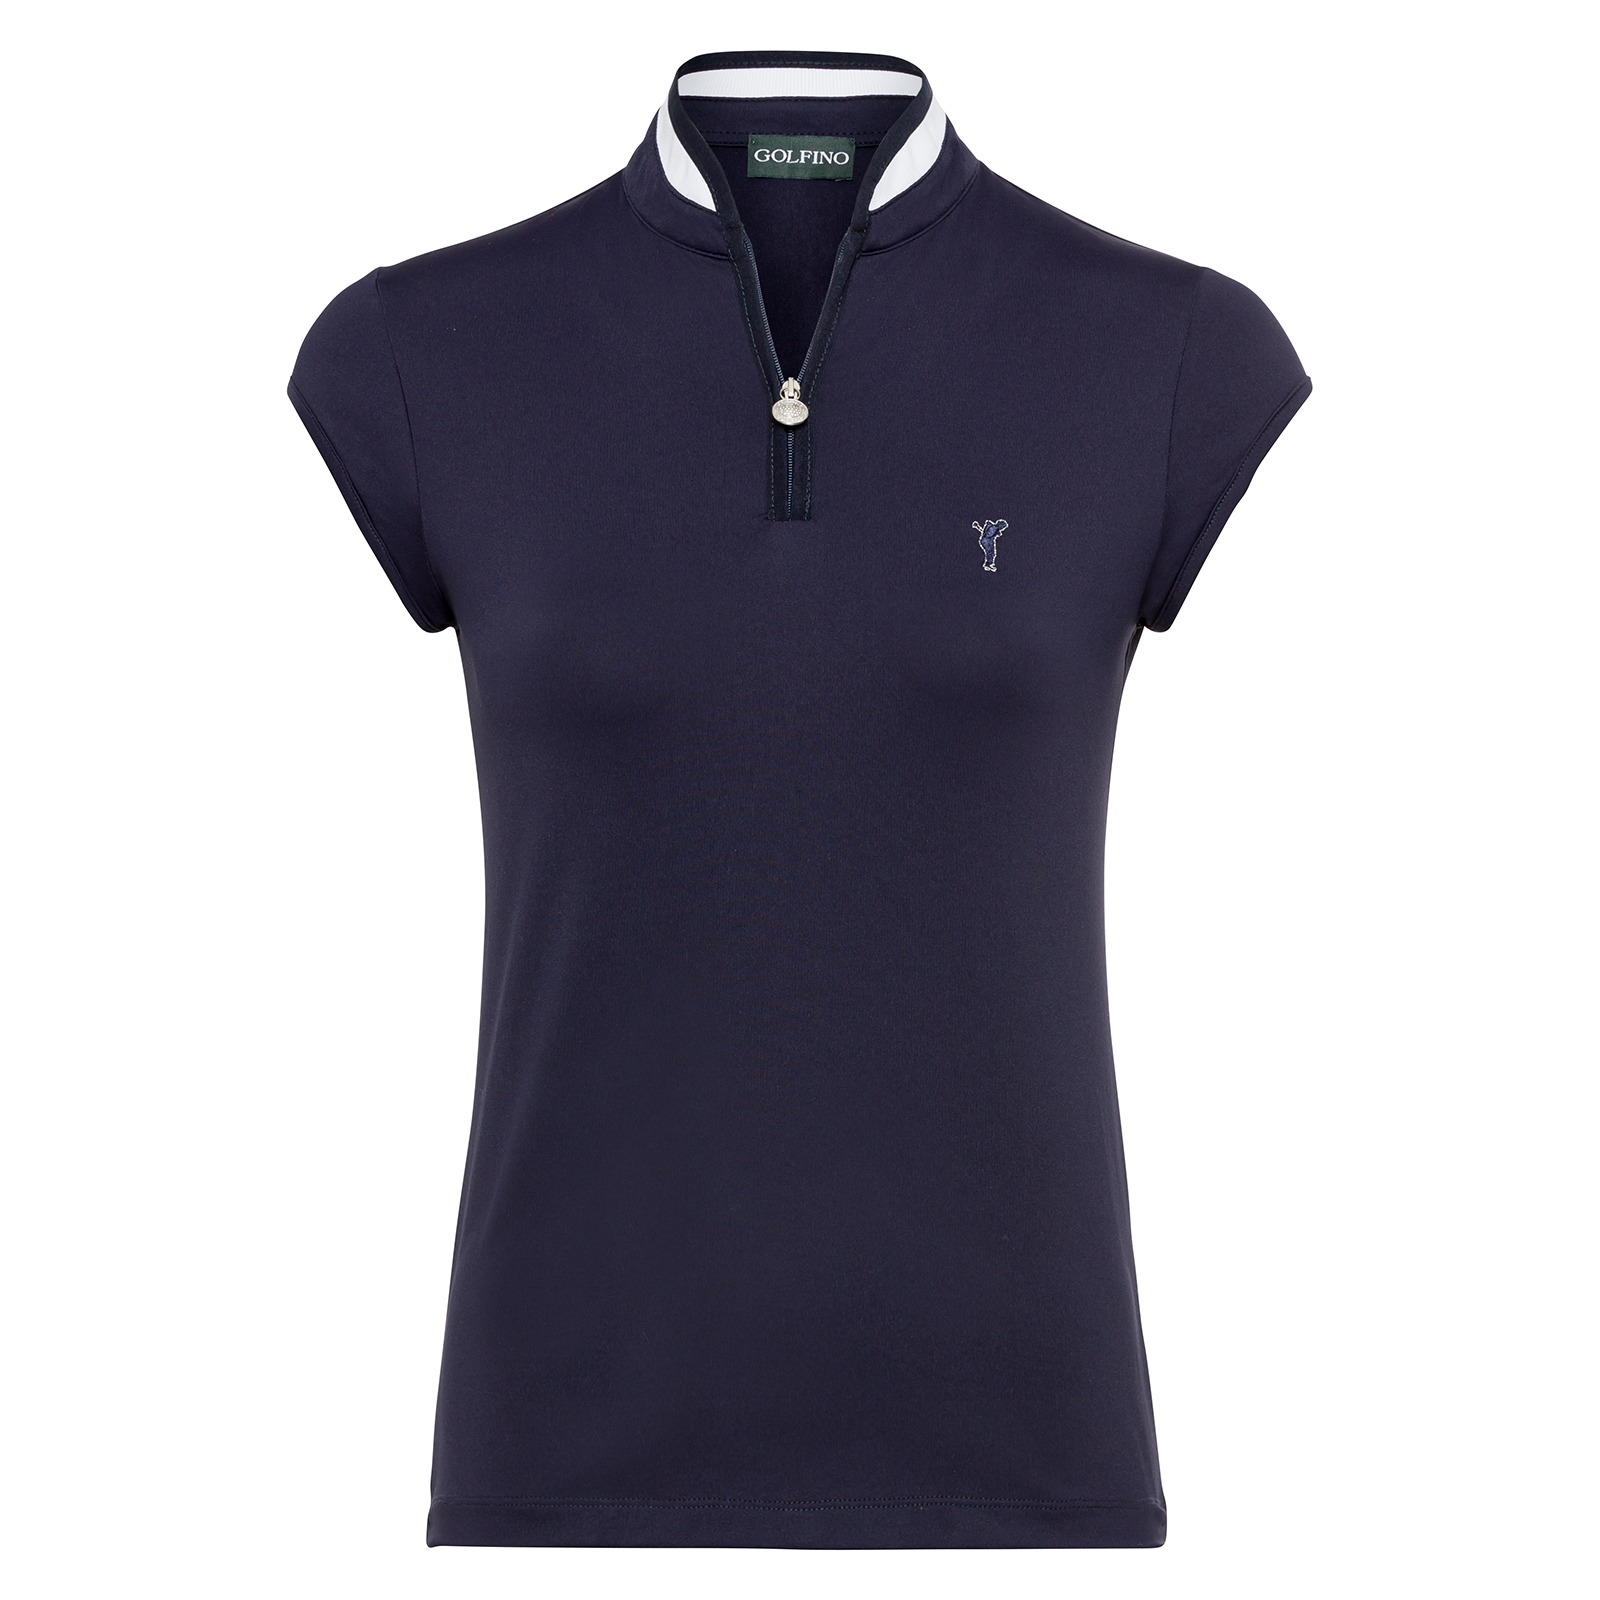 Ladies' polo shirt with troyer-style collar and cap sleeves made from sun protection fabric